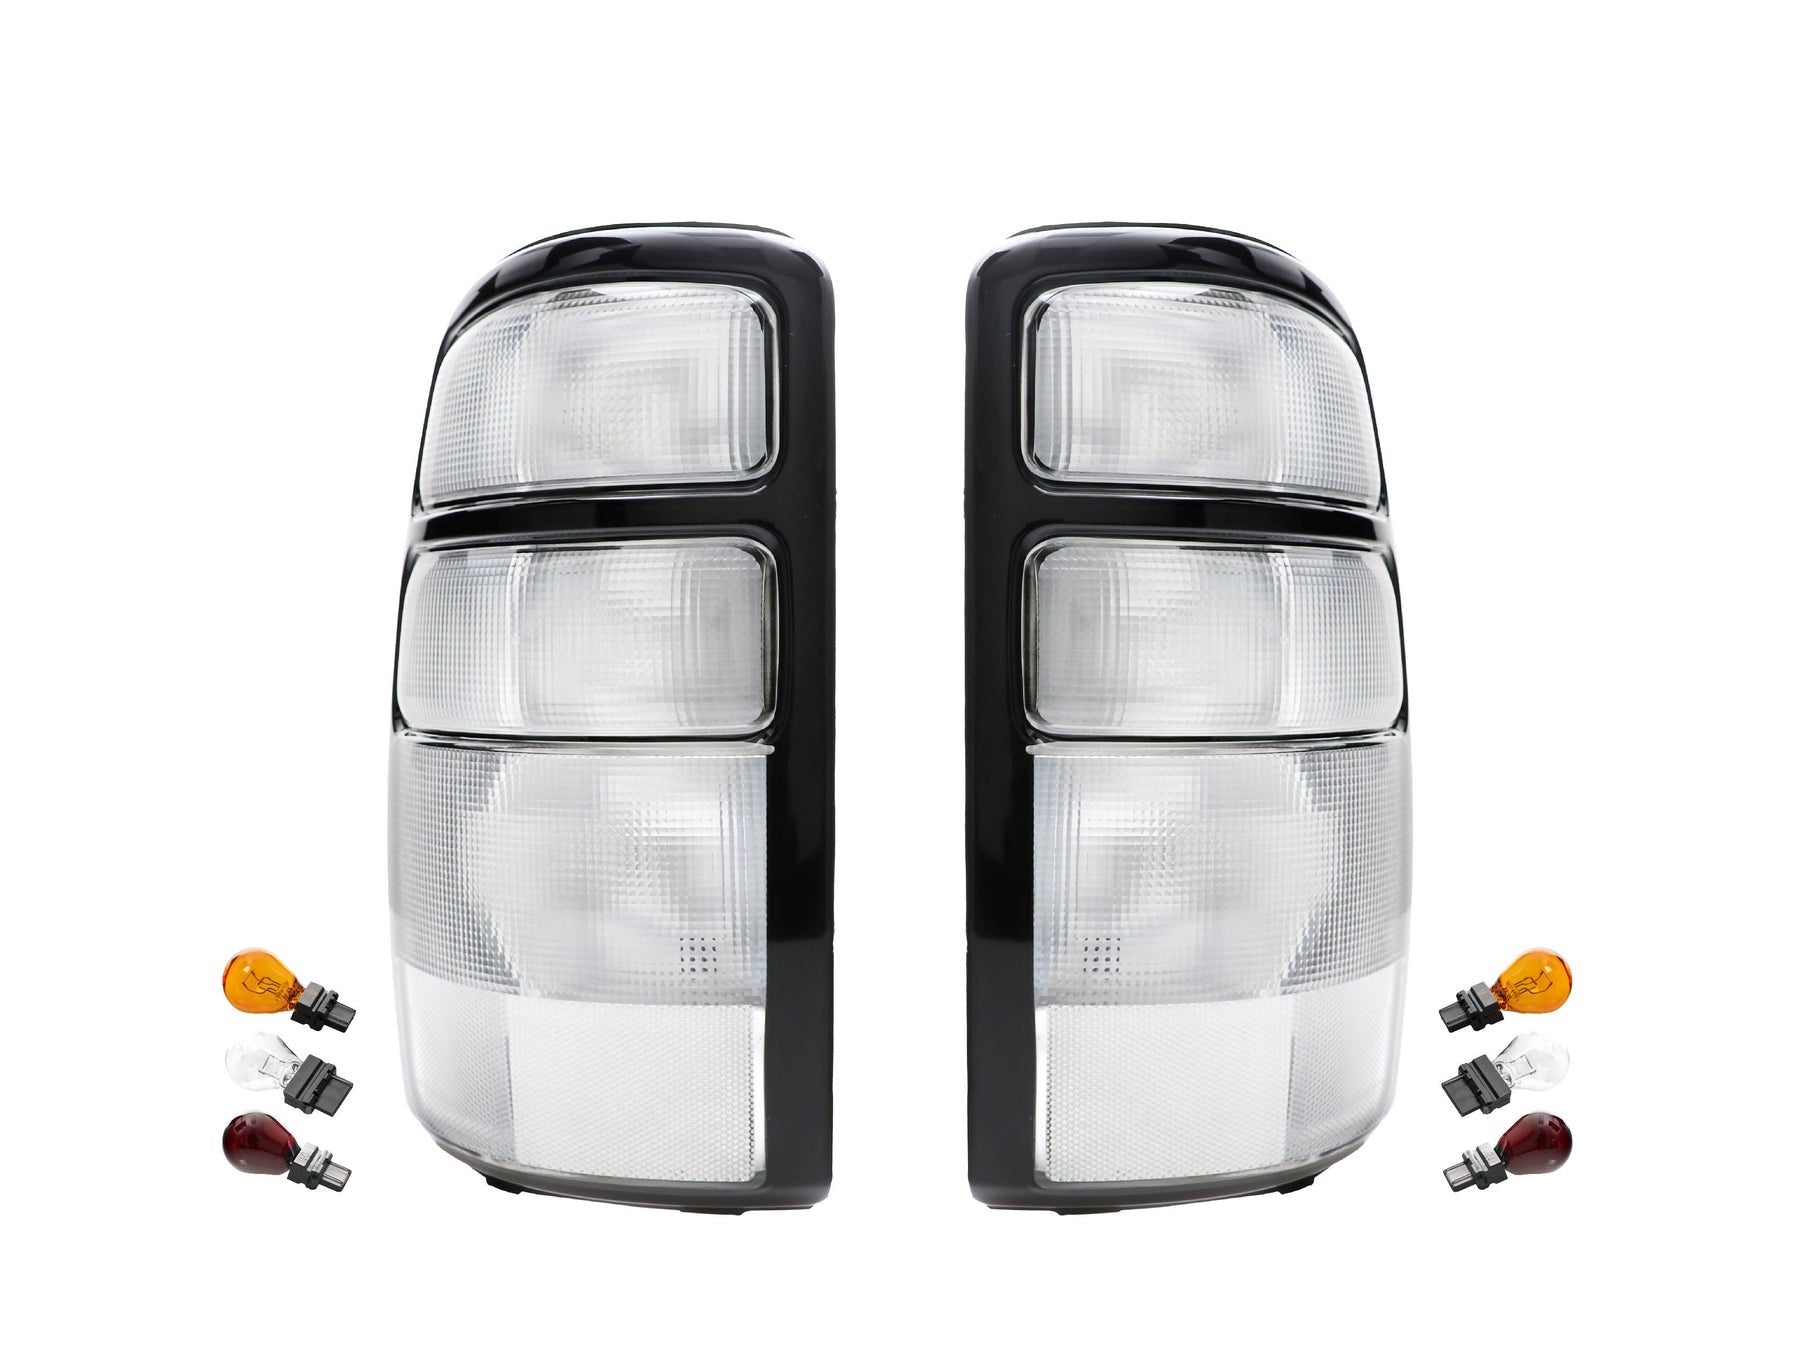 2000-2006 GMC Yukon / XL Denali / 2000-2006 Chevrolet Suburban / Tahoe All  Clear Euro Style Tail Lights - Made by DPEO